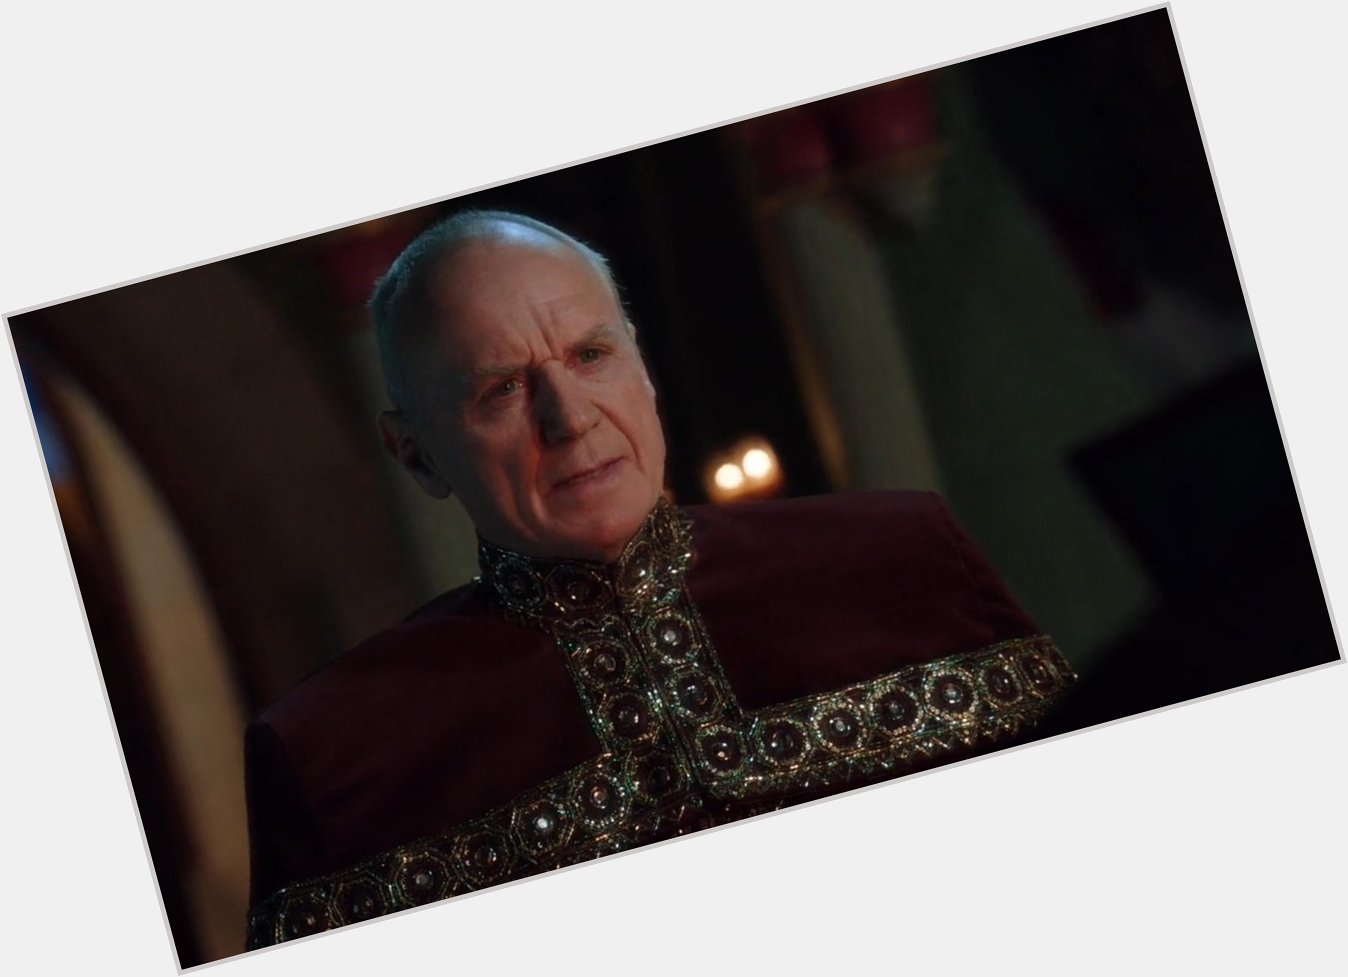  Happy birthday to Alan Dale He was on once upon a time as king George before dynasty 